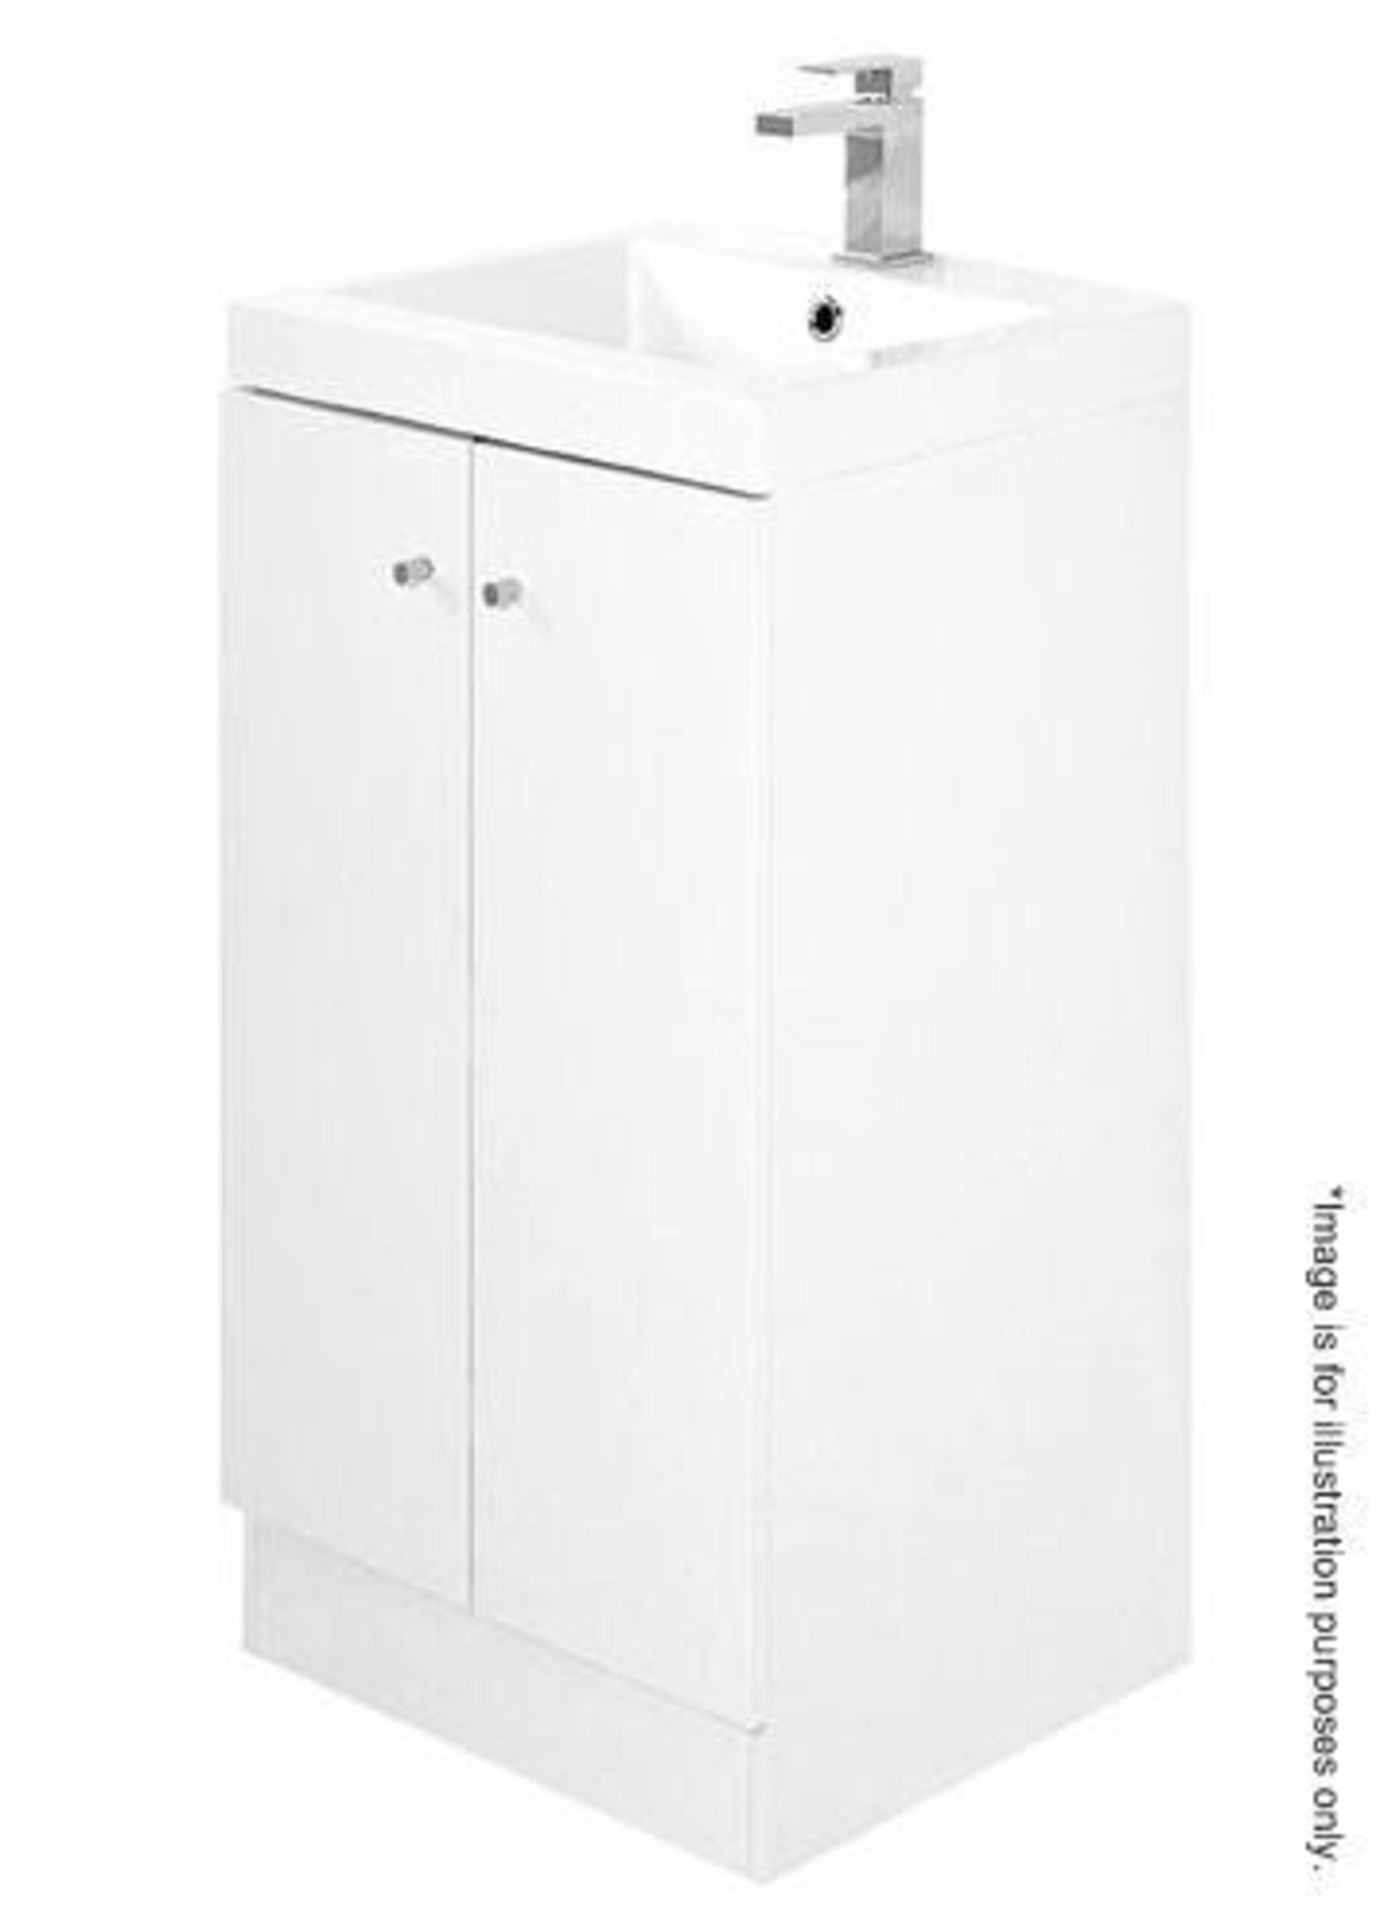 5 x Alpine Duo 400 Floorstanding Vanity Units In Gloss White - Brand New Boxed Stock - Dimensions: H - Image 3 of 3